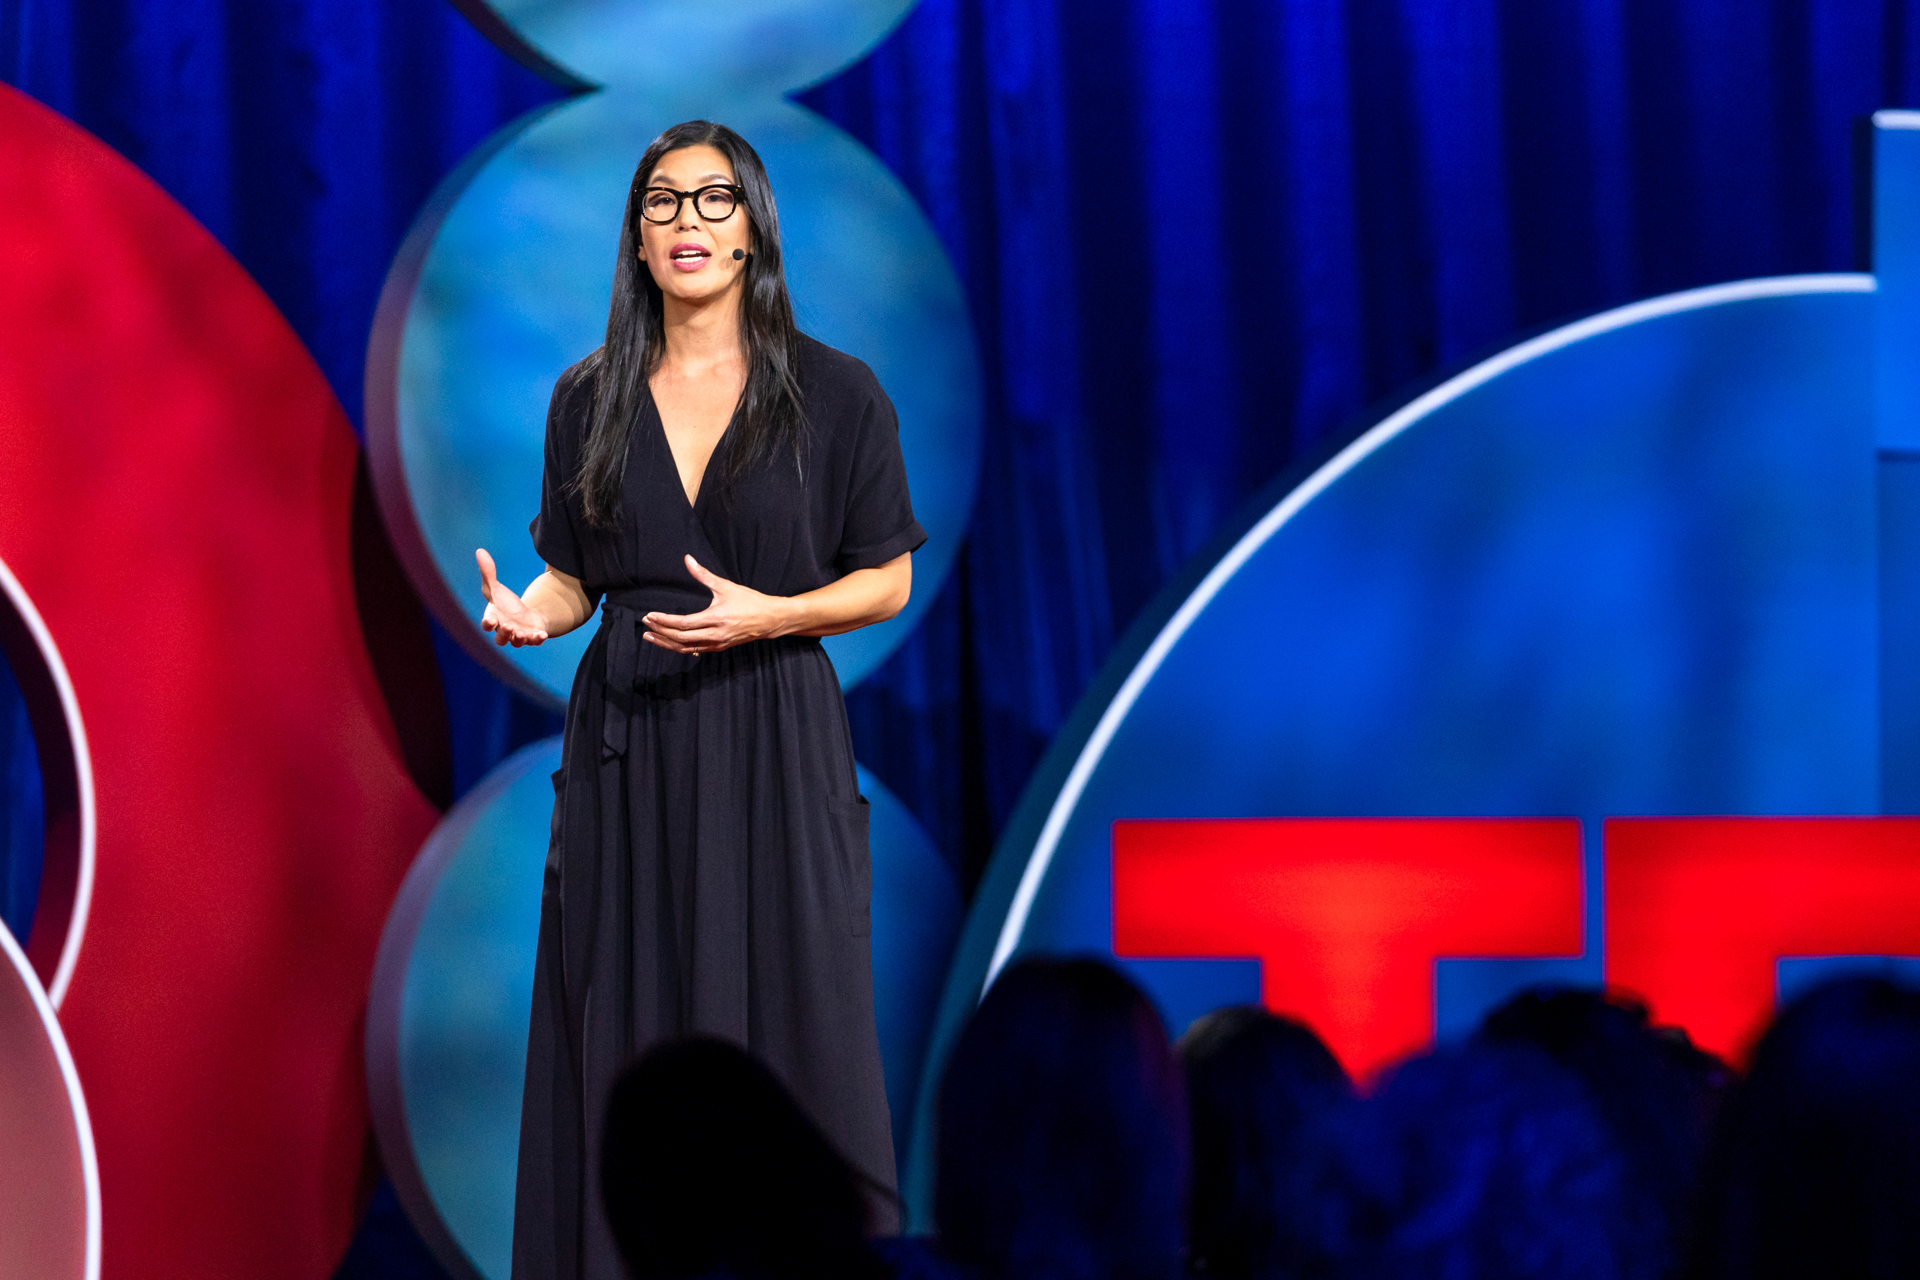 A new mission to mobilize 2 million women in US politics … and more
TED news